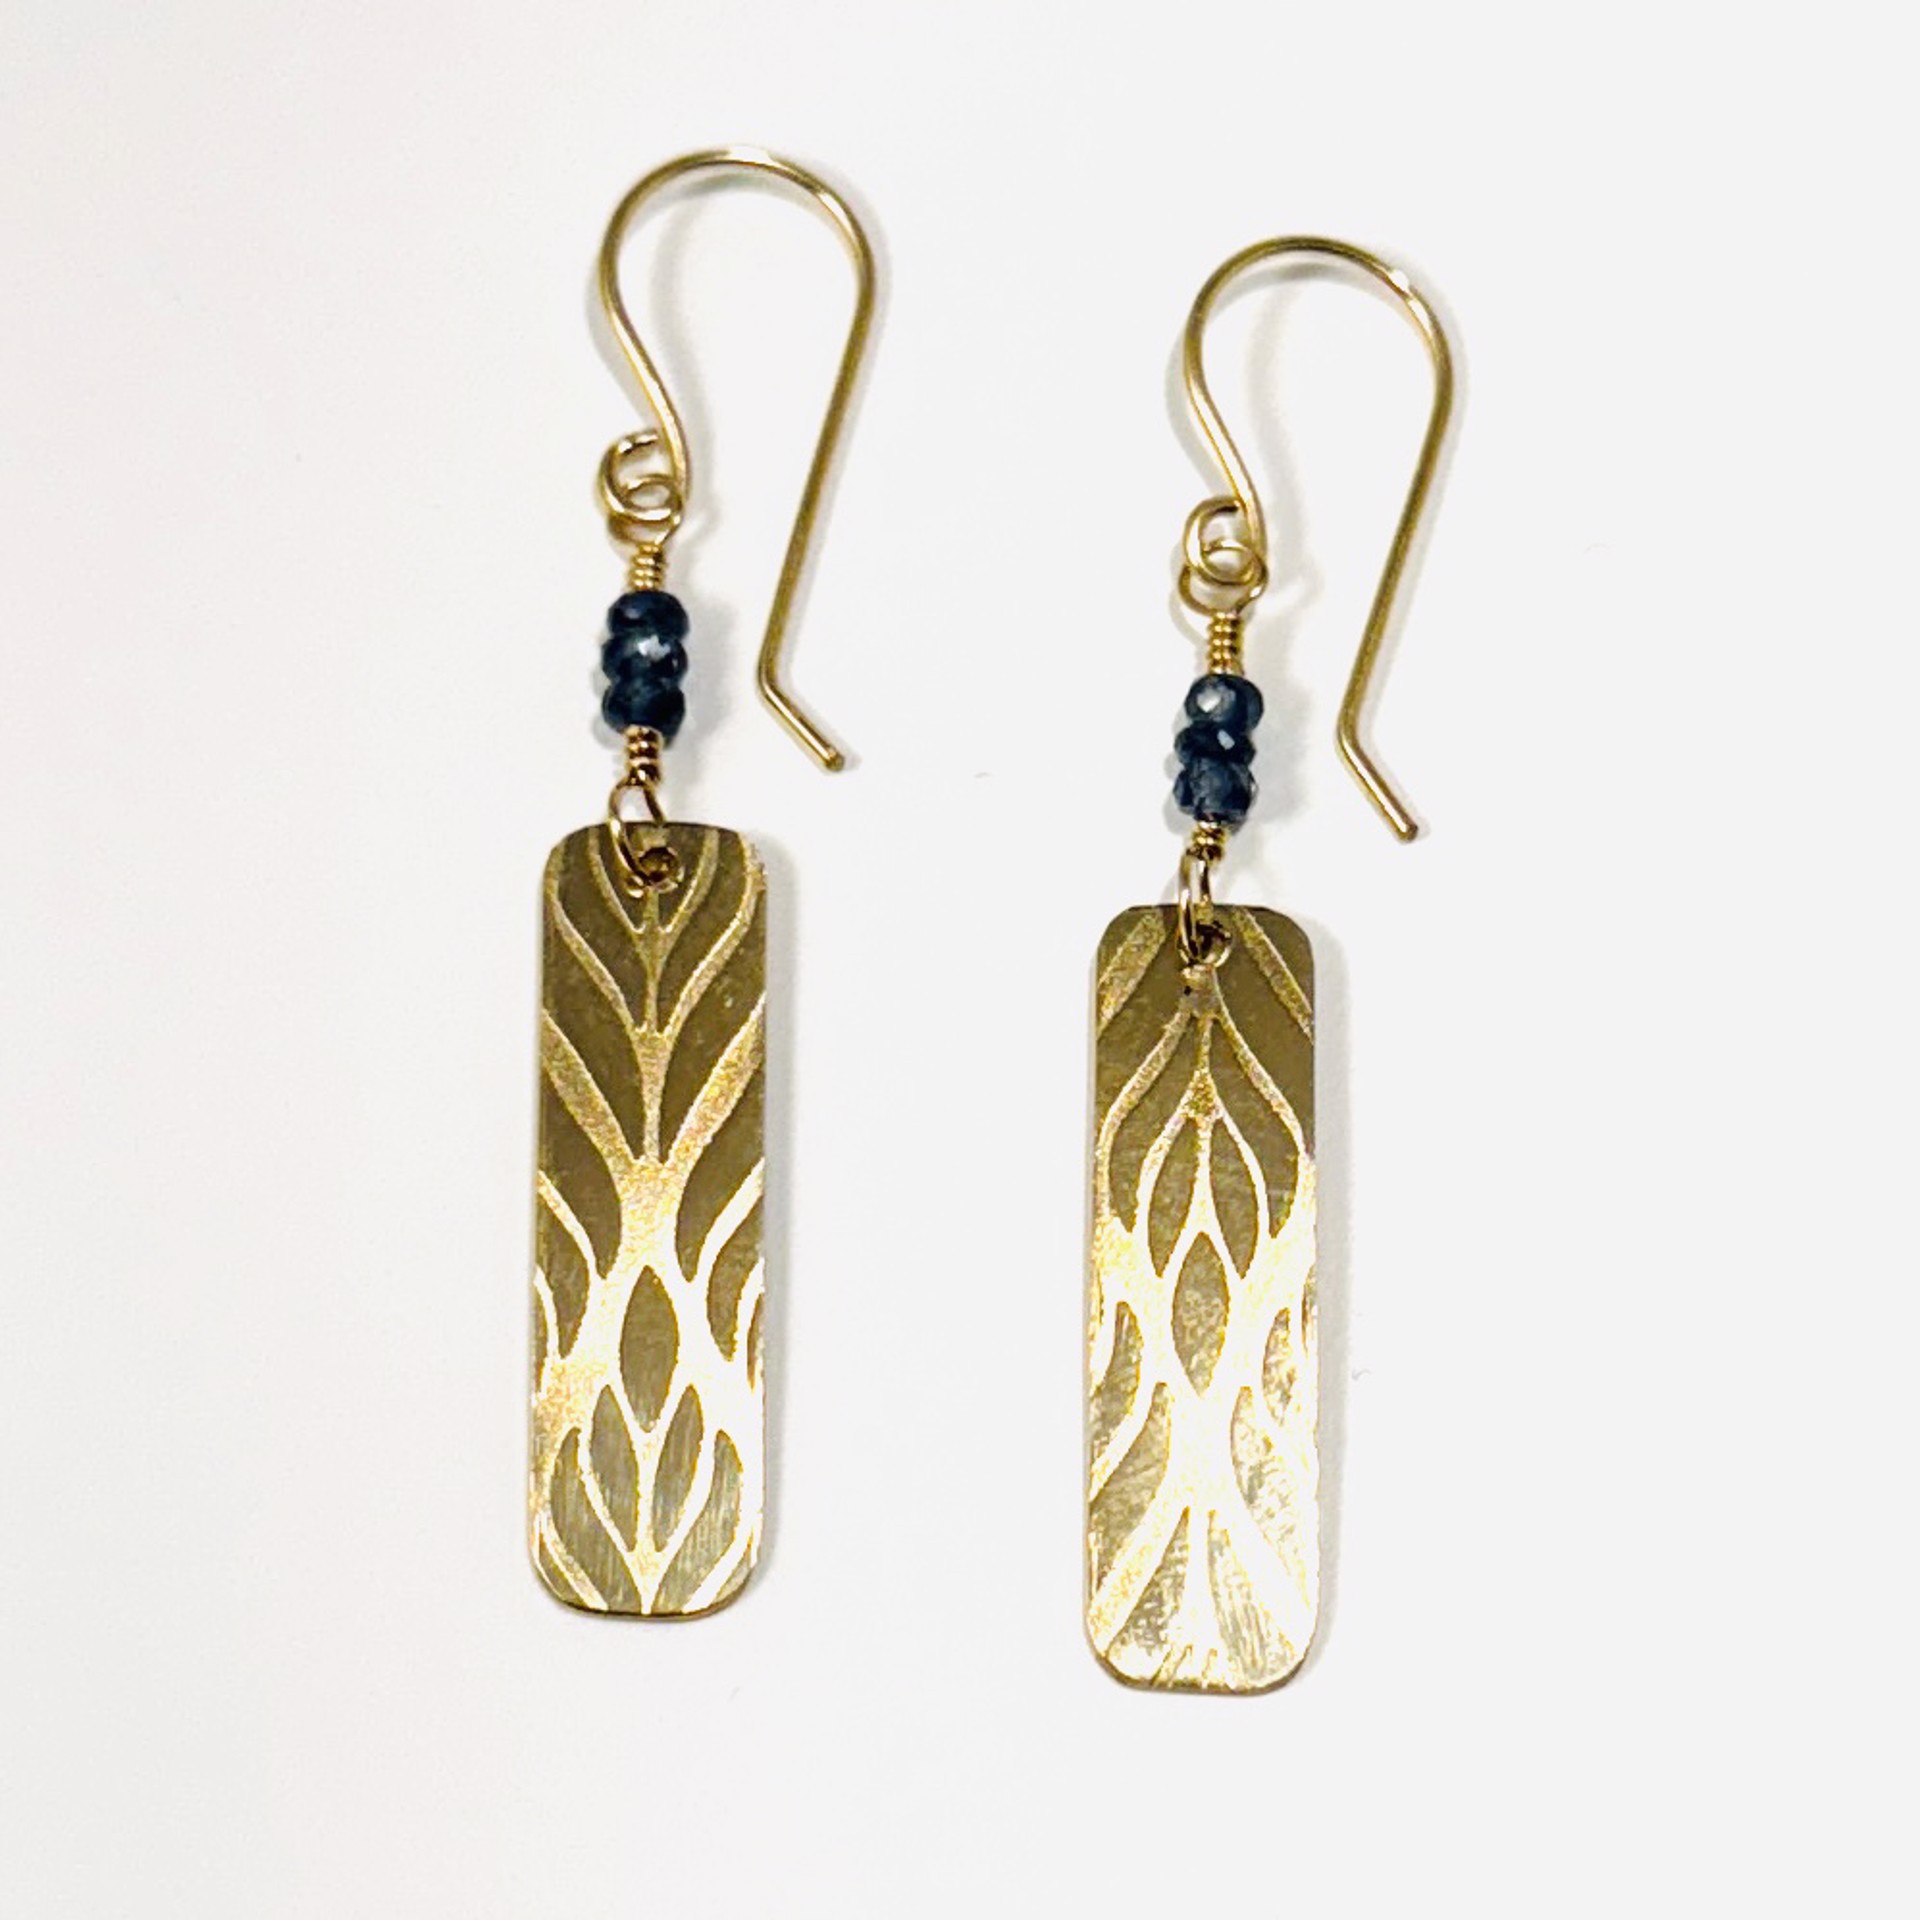 Sapphire Beads with 14Kgf Paddle Drop Earrings AB23-94 by Anne Bivens